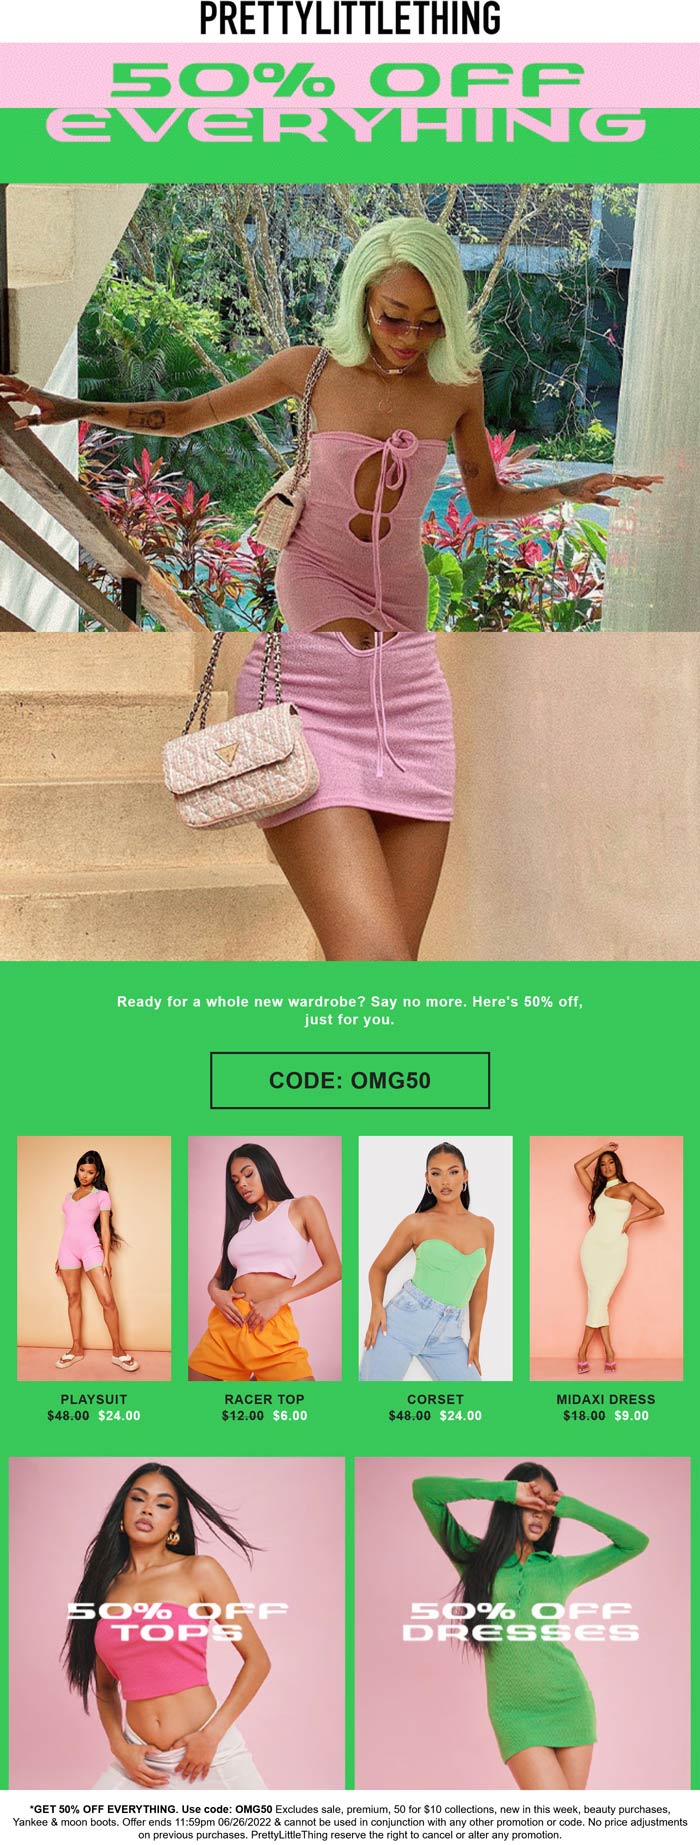 PrettyLittleThing stores Coupon  50% off everything at PrettyLittleThing via promo code OMG50 #prettylittlething 